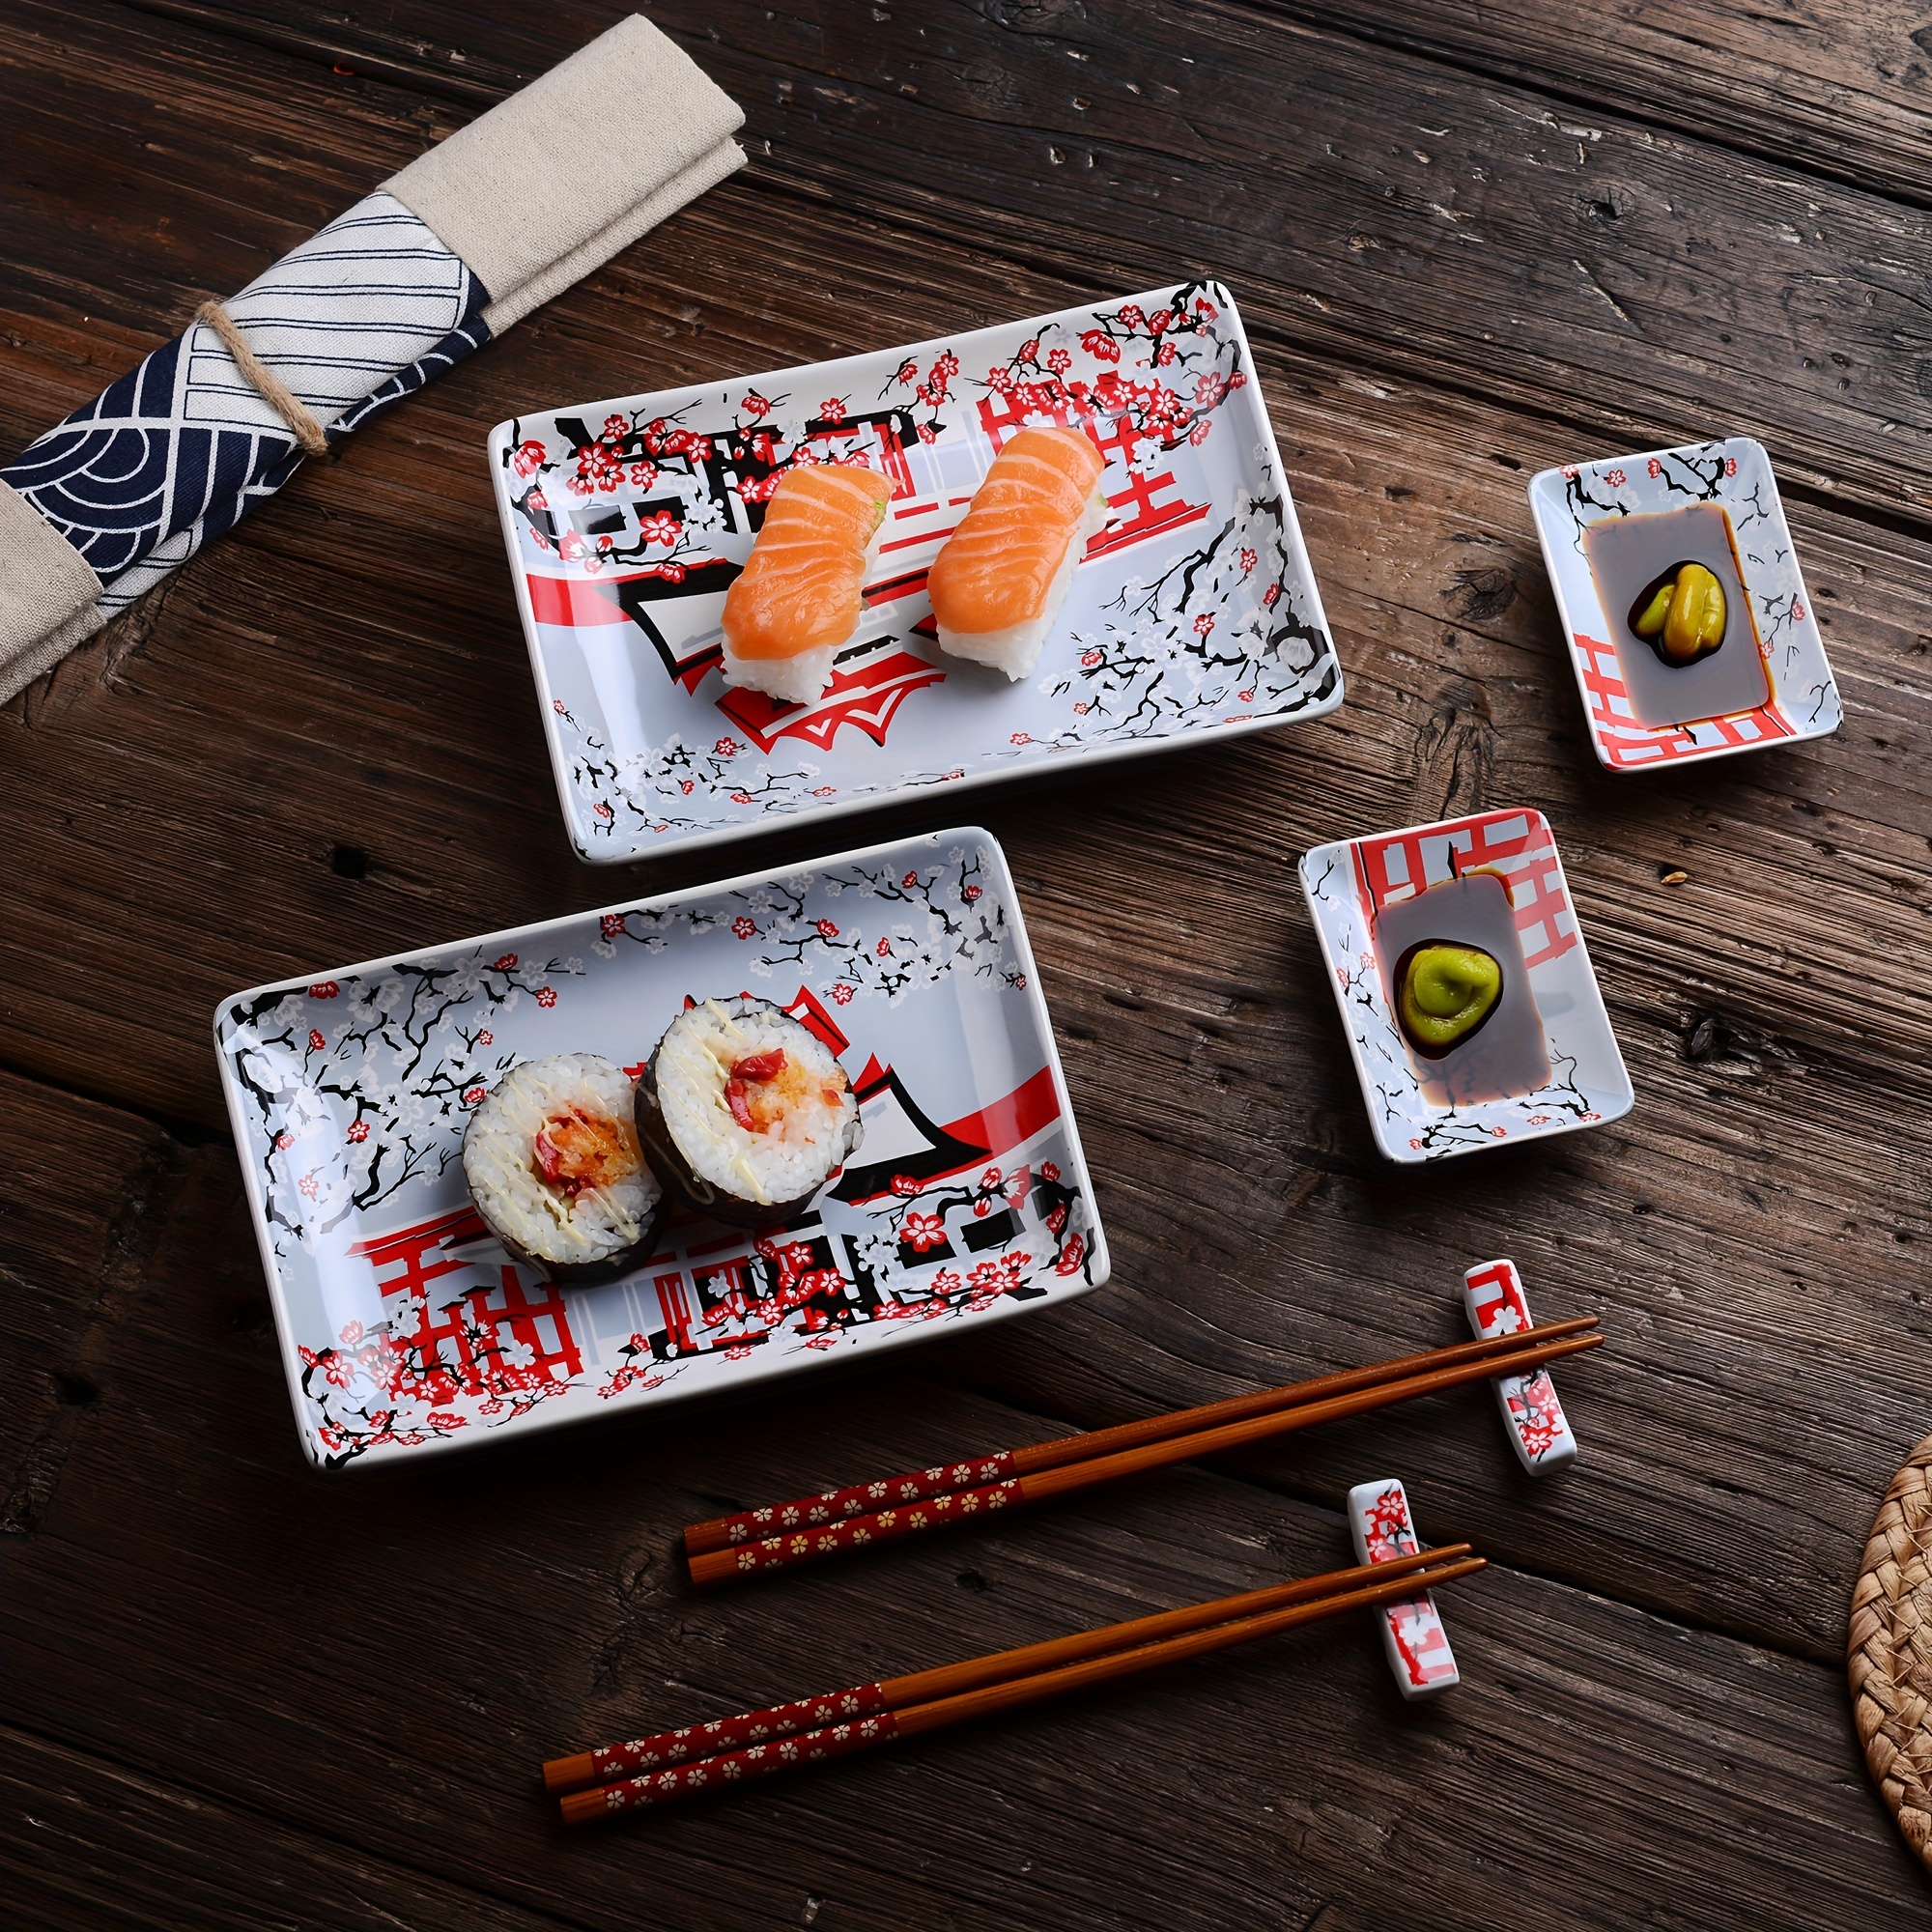 8 PCS Porcelain Sushi Sets, Japanese Style Dinnerware Set, Included 2 X  Sushi Plates, 2 X Dip Bowls, 2 X Sticks Stands, 2 Pairs Of Bamboo  Chopsticks F